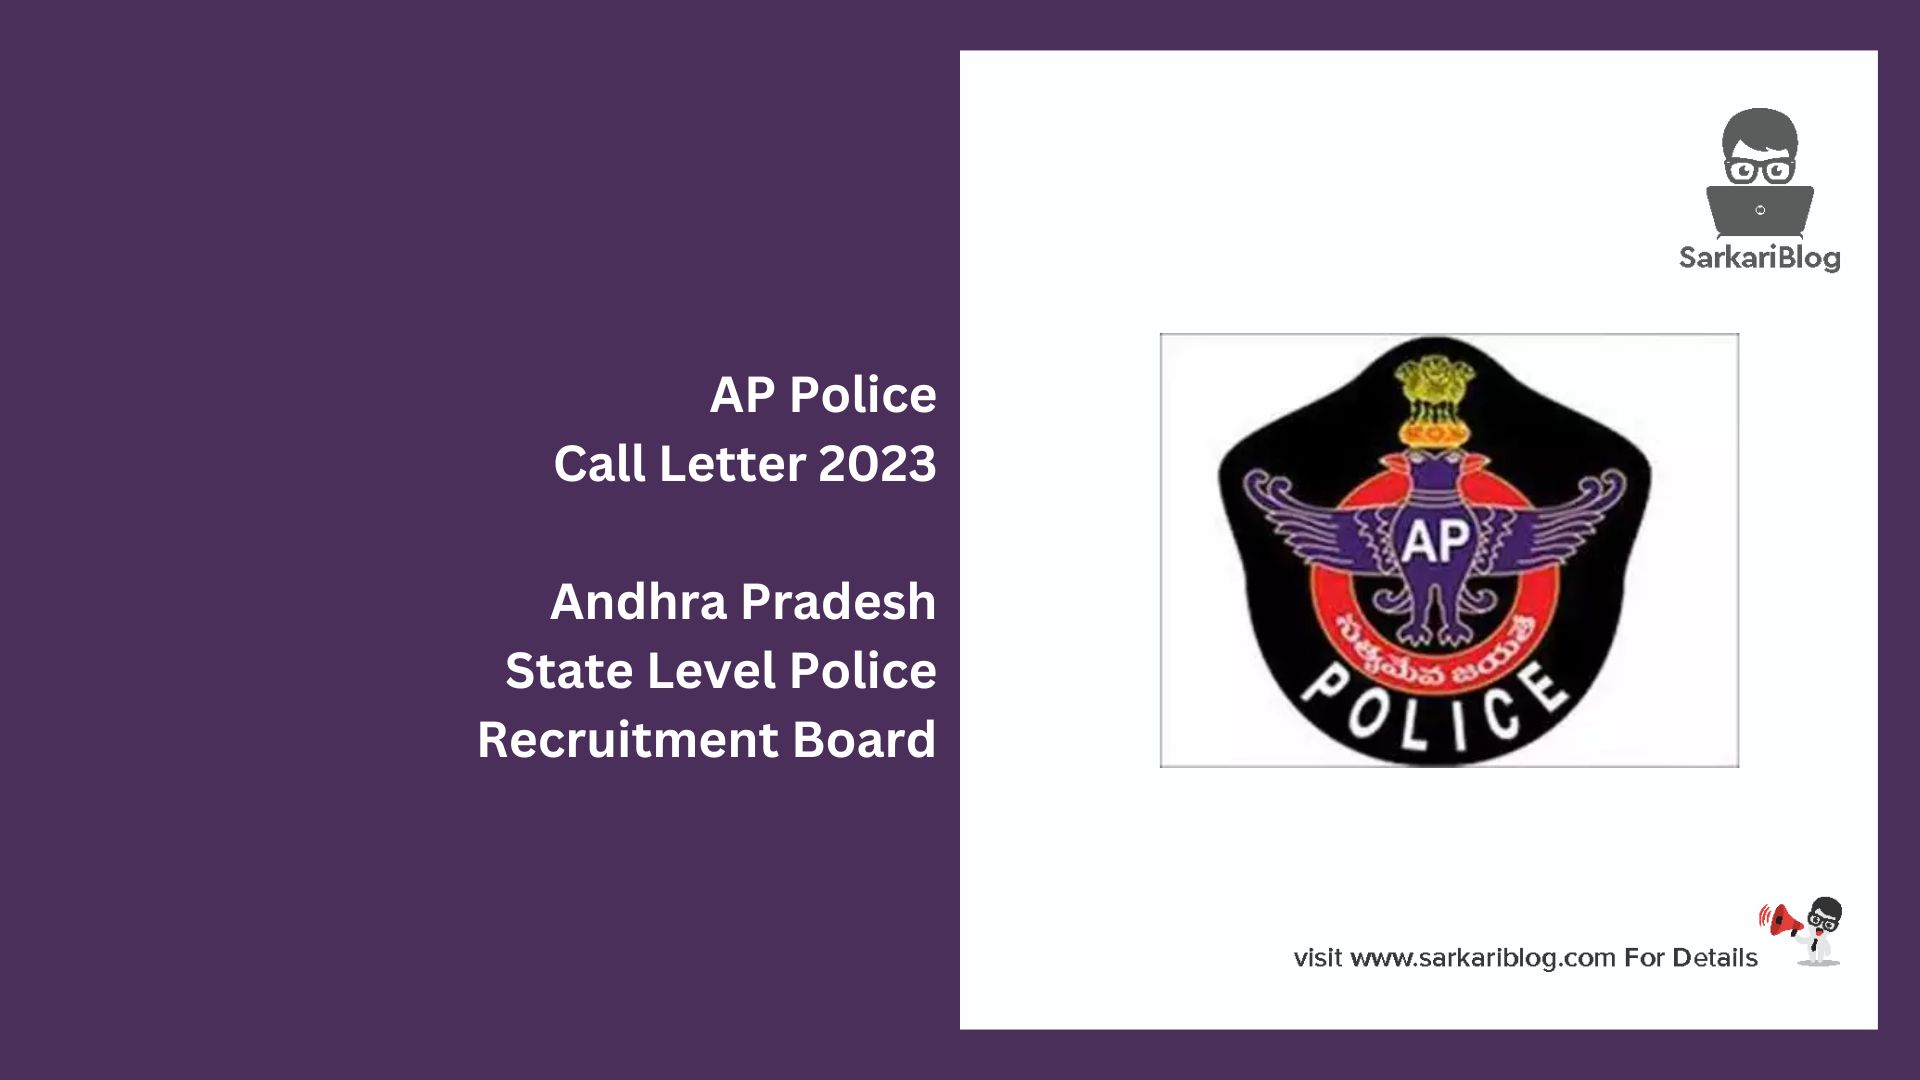 AP Police Call Letter 2023